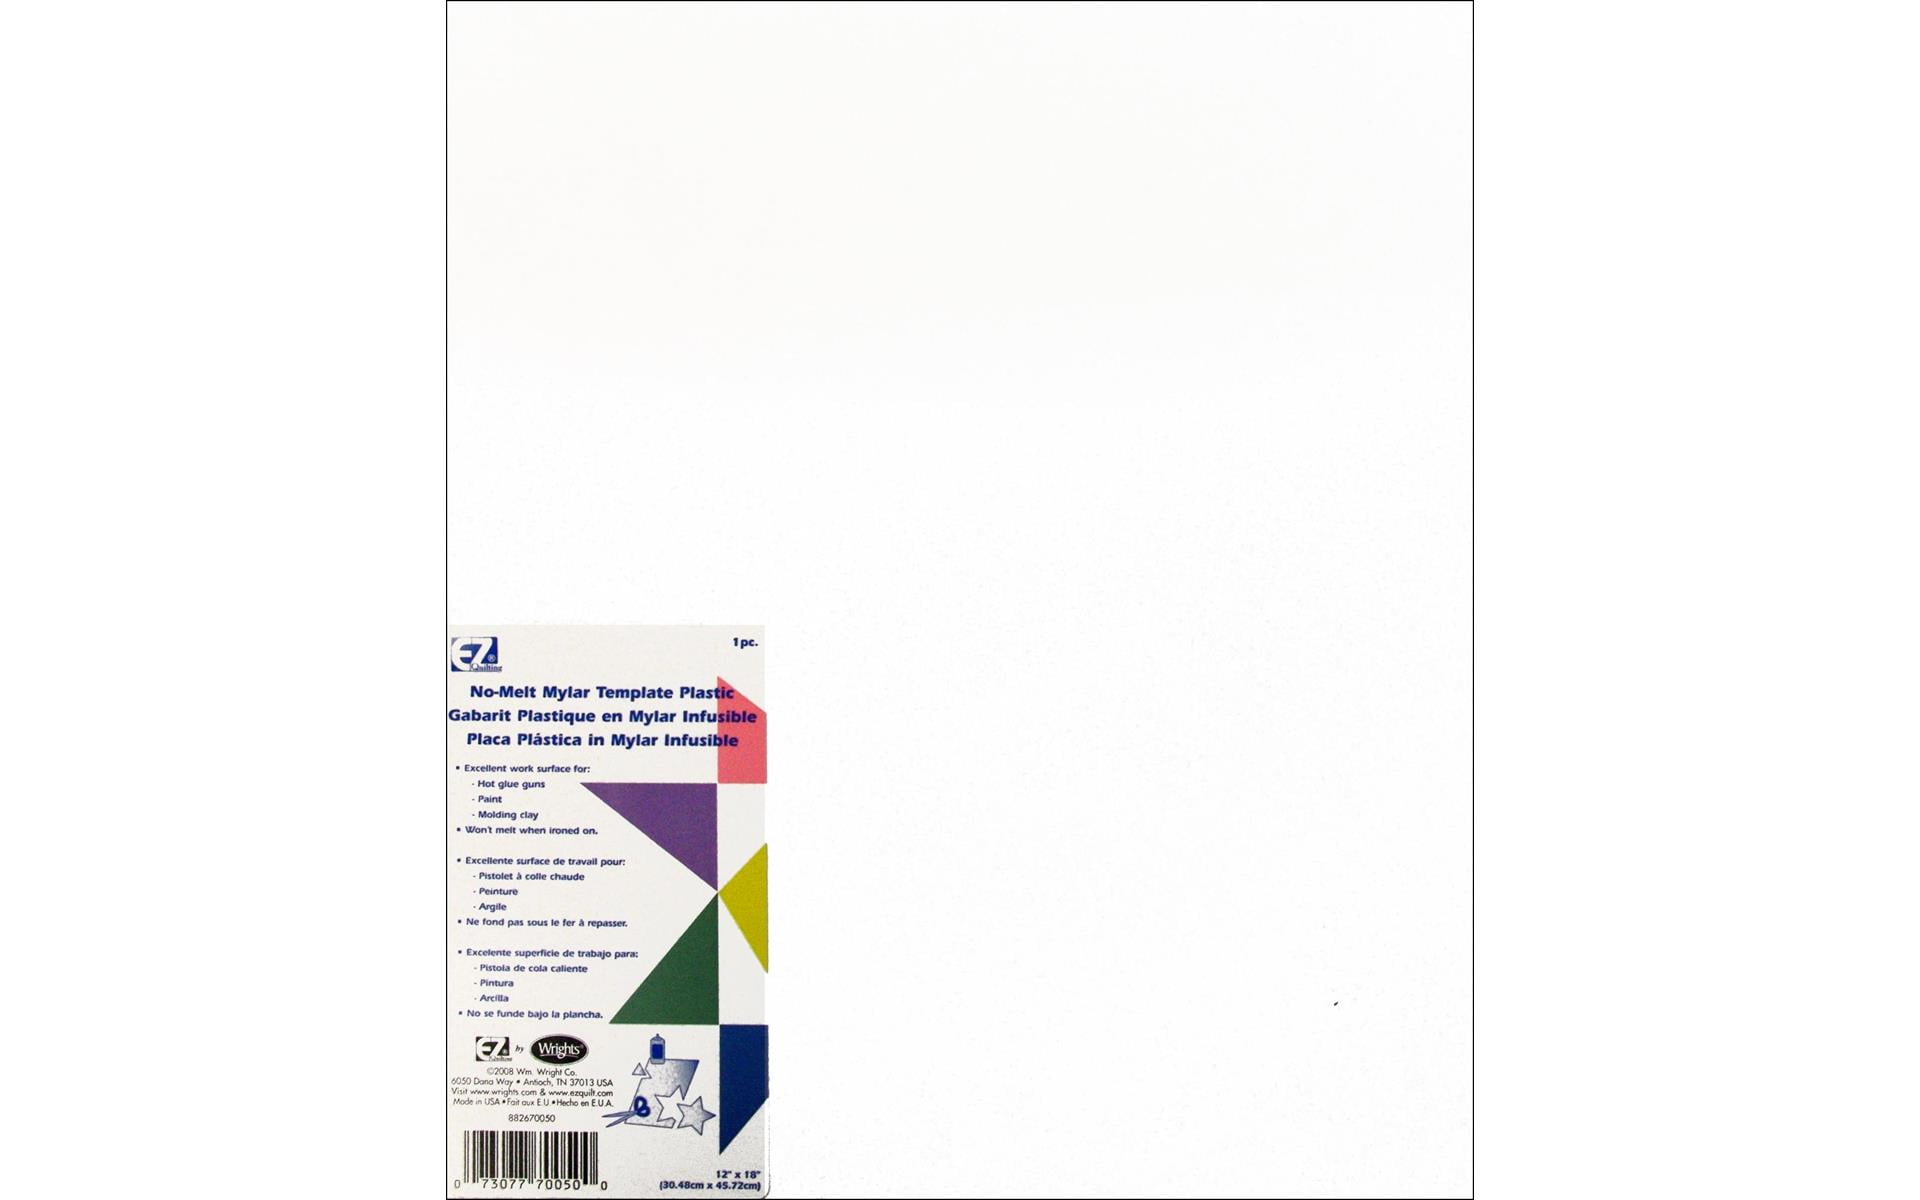 Heat Resistant Mylar Template Plastic 12in x 18in – Quilters Apothecary